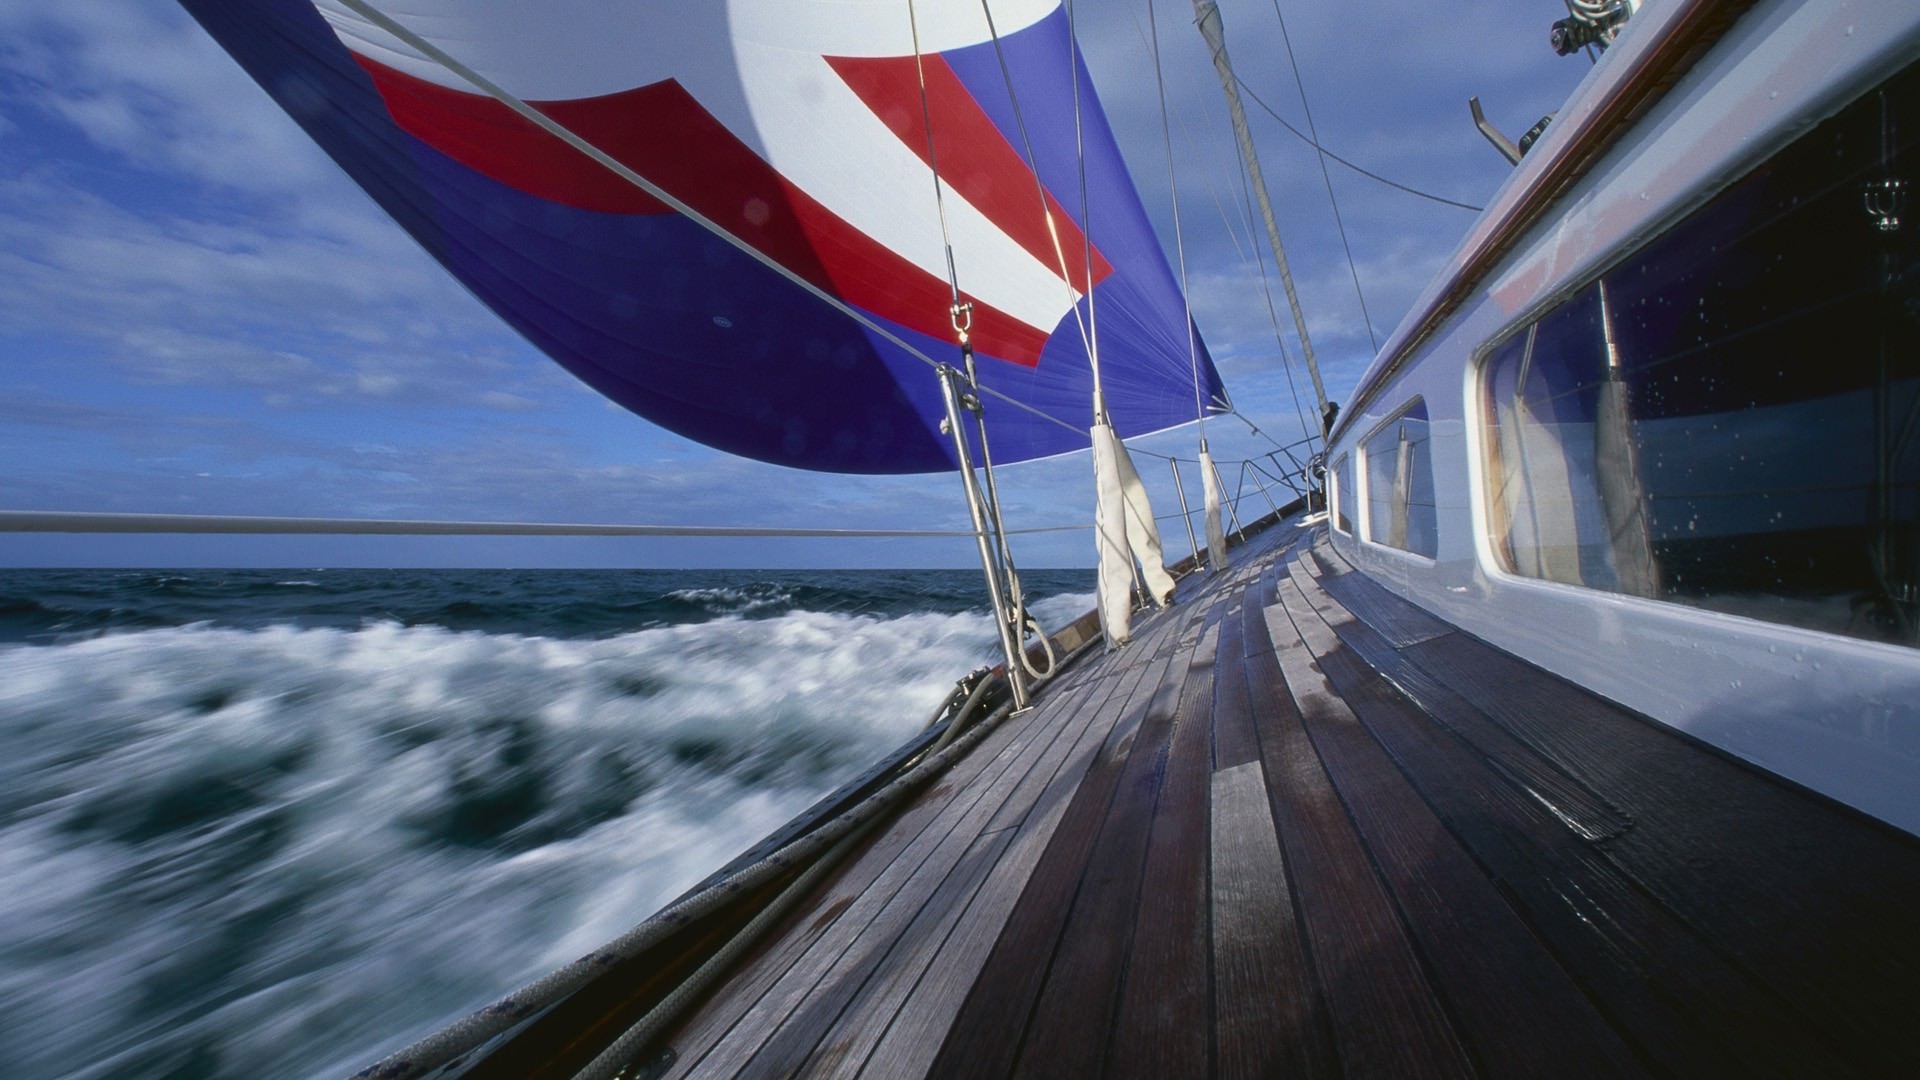 Sailing: The activity of riding in a boat that is propelled by the wind, A water sport. 1920x1080 Full HD Background.